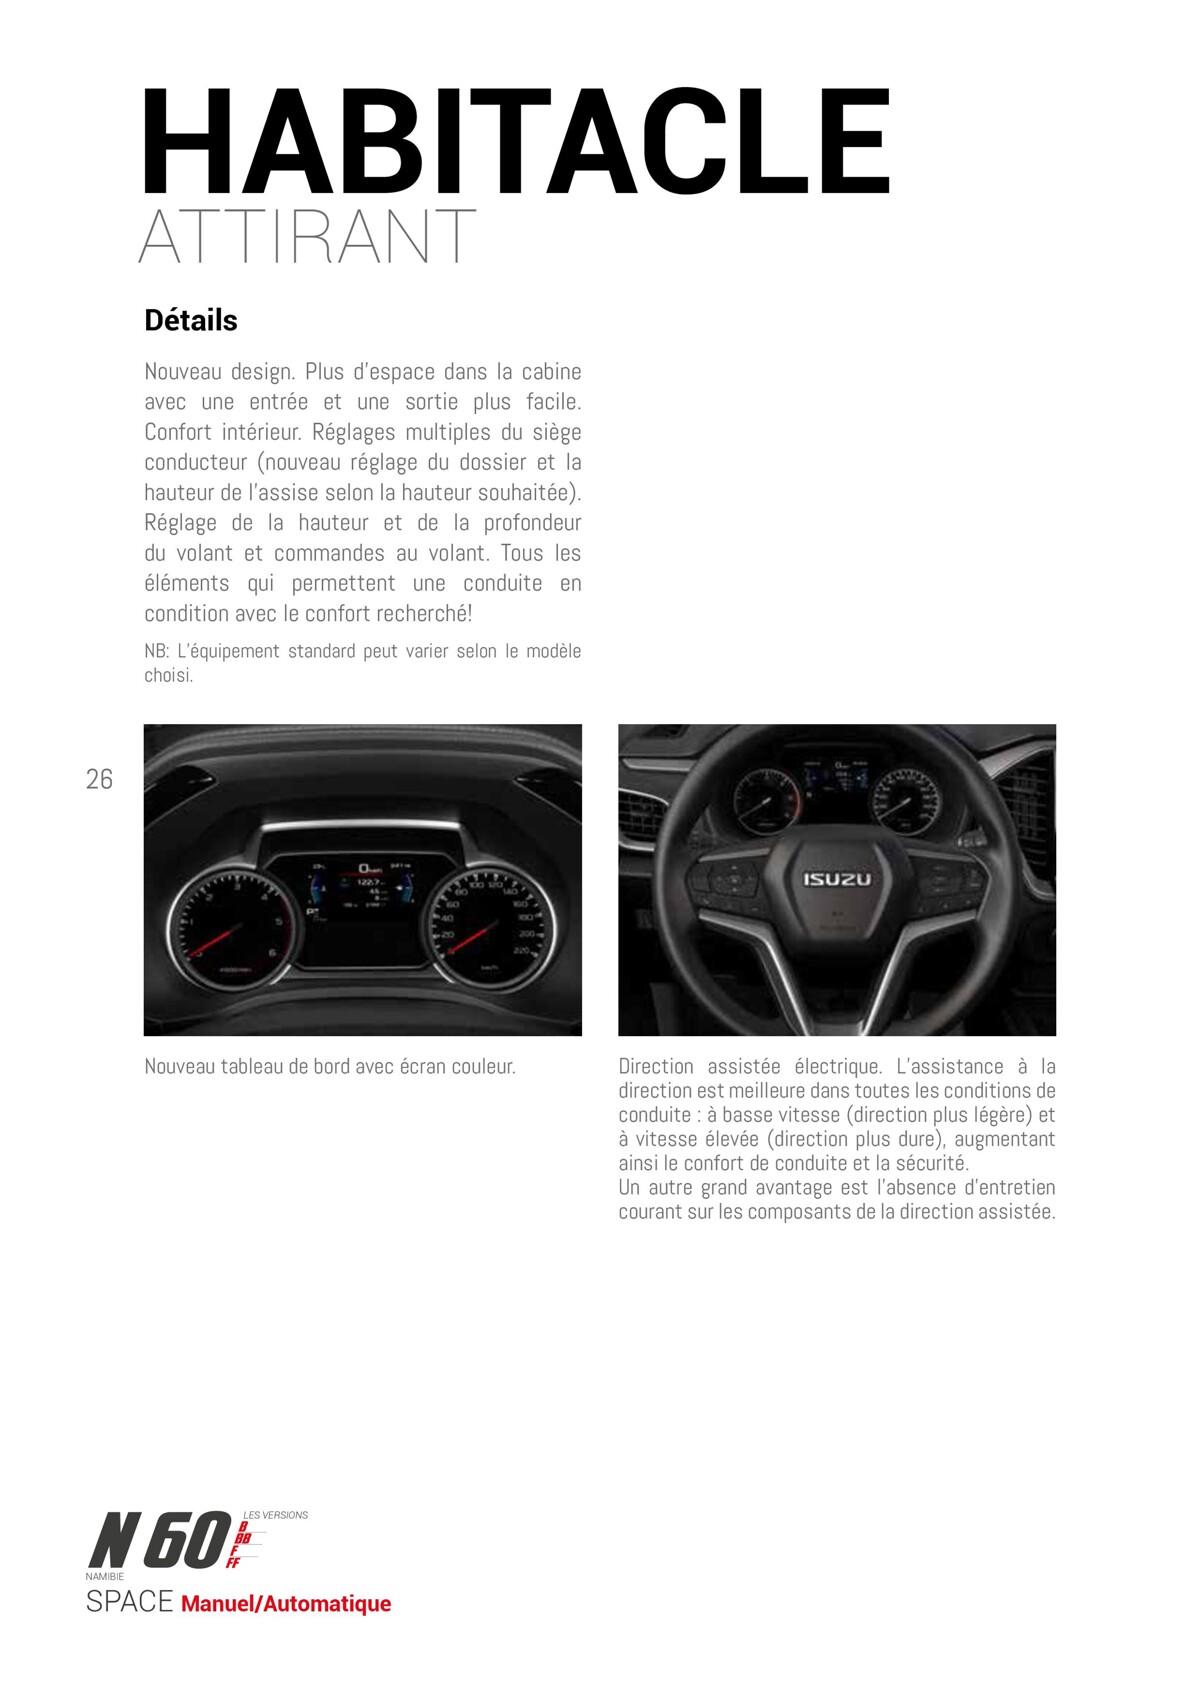 Catalogue D-Max Space FRA, page 00028